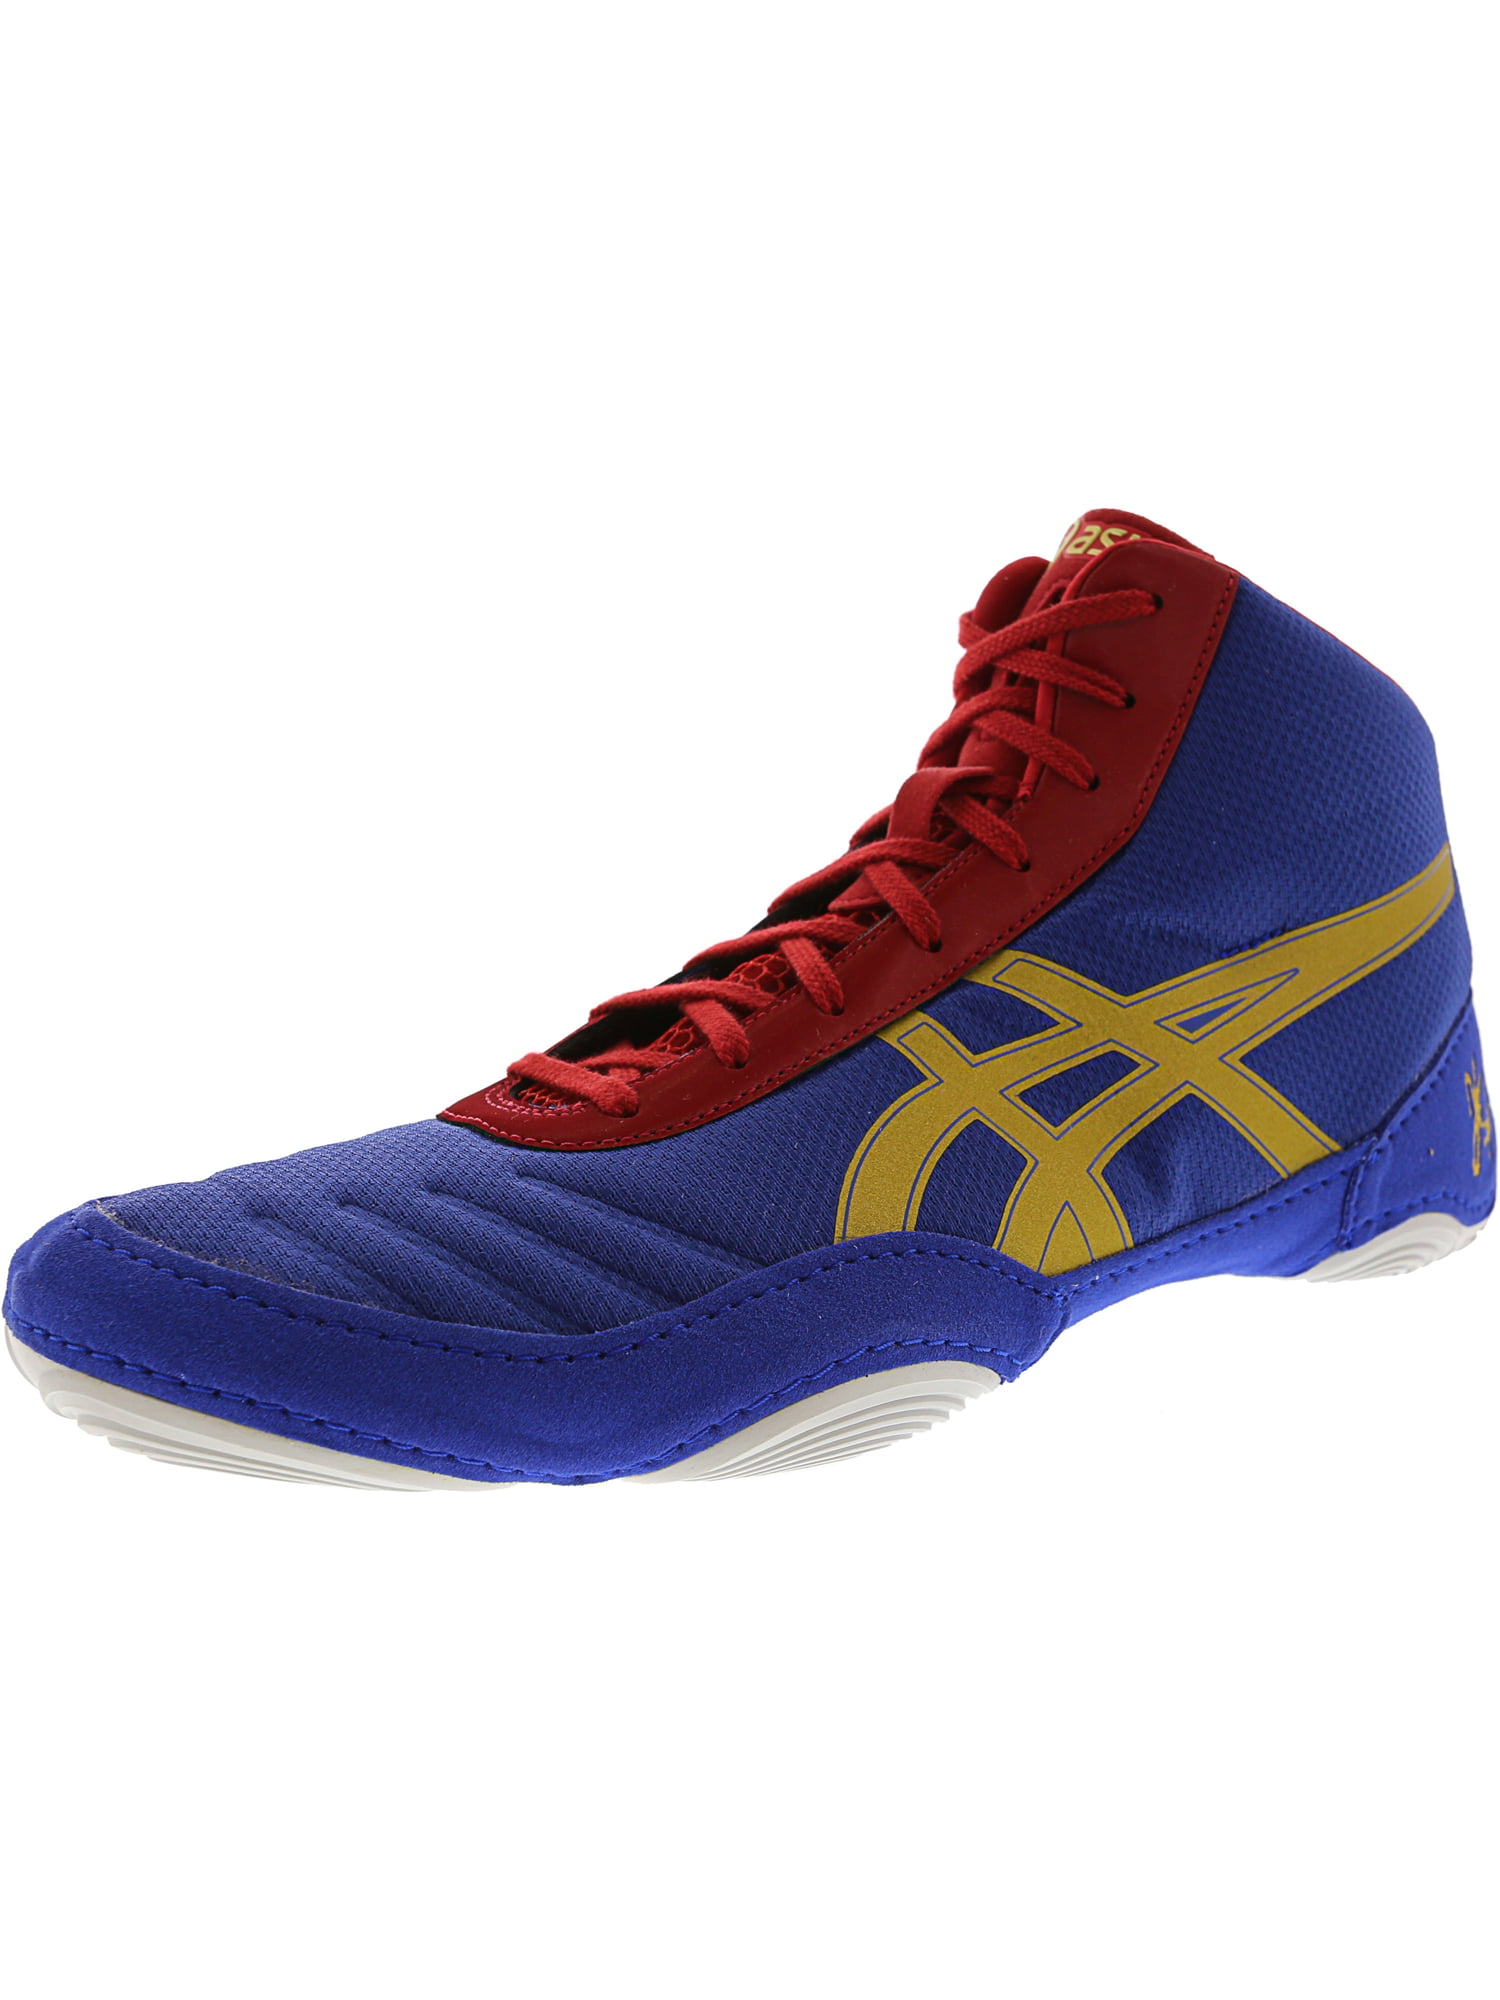 blue and gold wrestling shoes